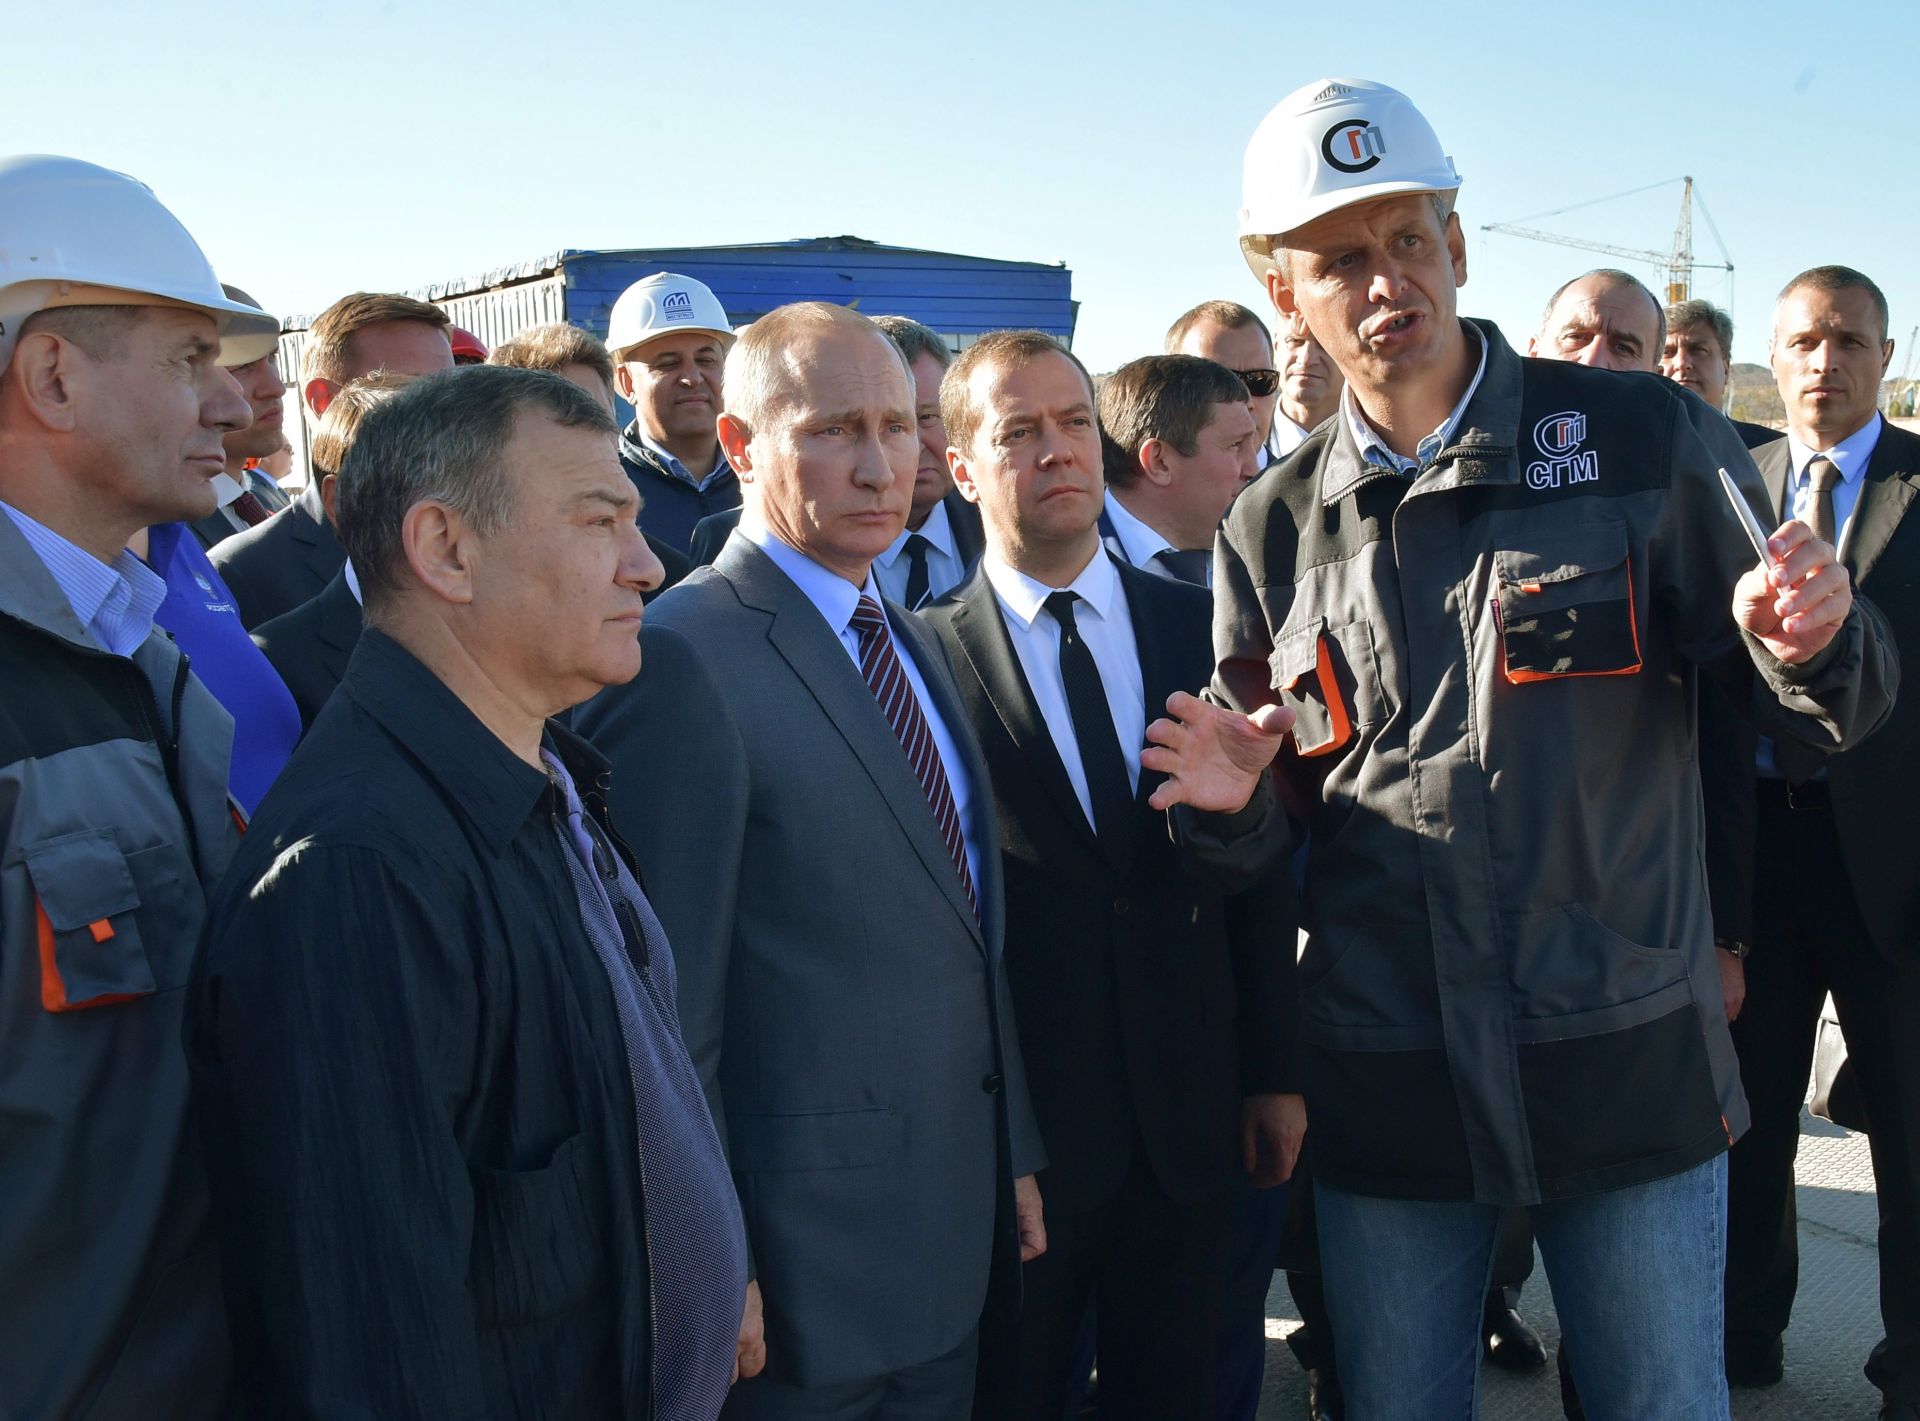 epa05542090 A photo made available 16 September 2016 of Russian President Vladimir Putin (C-L) and Russian Prime Minister Dmitry Medvedev (C-R) listening to Stroygazmontazh director Leonid Ryzhenkin (R), contractor of the construction of the bridge across the Kerch Strait, during a visit to the construction site of a transport overpass over the Kerch Strait from the Russian Krasnodar region coast to Crimea, in Kerch, Crimea, 15 September 2016. At left is enterpreneur Arkady Rotenberg.  EPA/ALEXANDER ASTAFYEV/GOVERNMENTAL PRESS SERVICE MANDATORY CREDIT
PICTURES MADE AVAILABLE TODAY